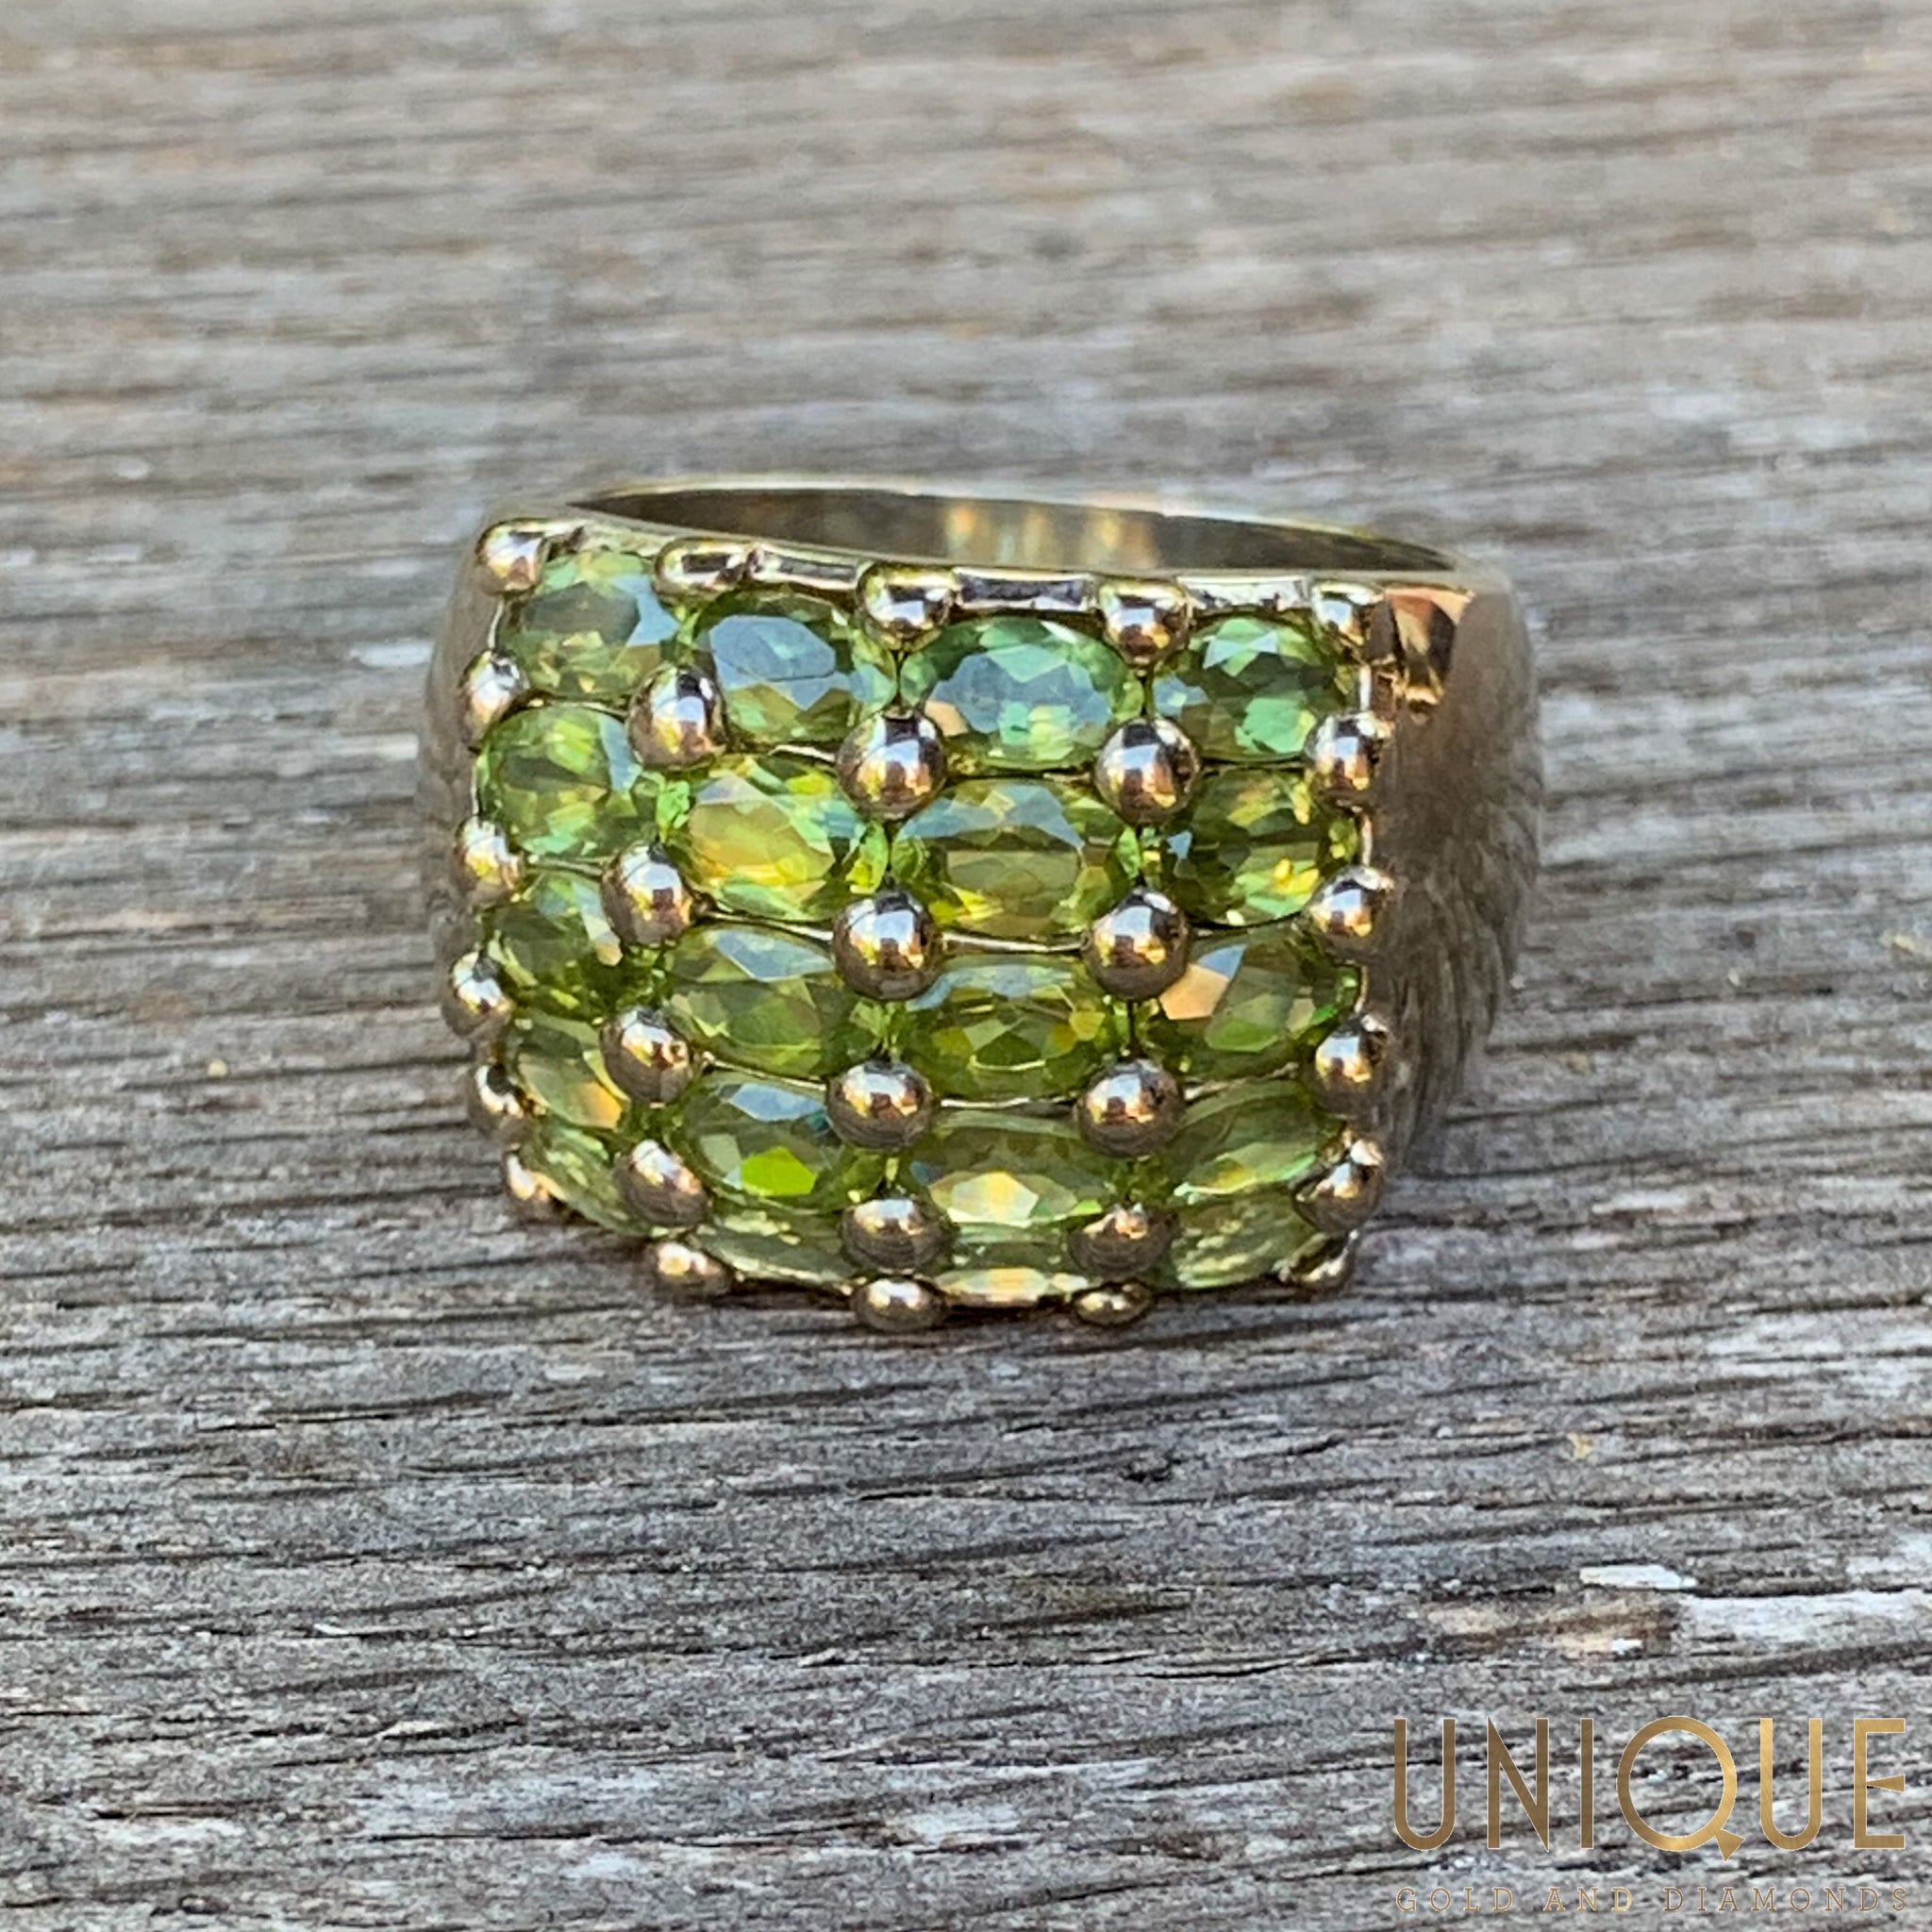 Vintage Sterling Silver Large Green Stone Ring - Unique Gold & Diamonds